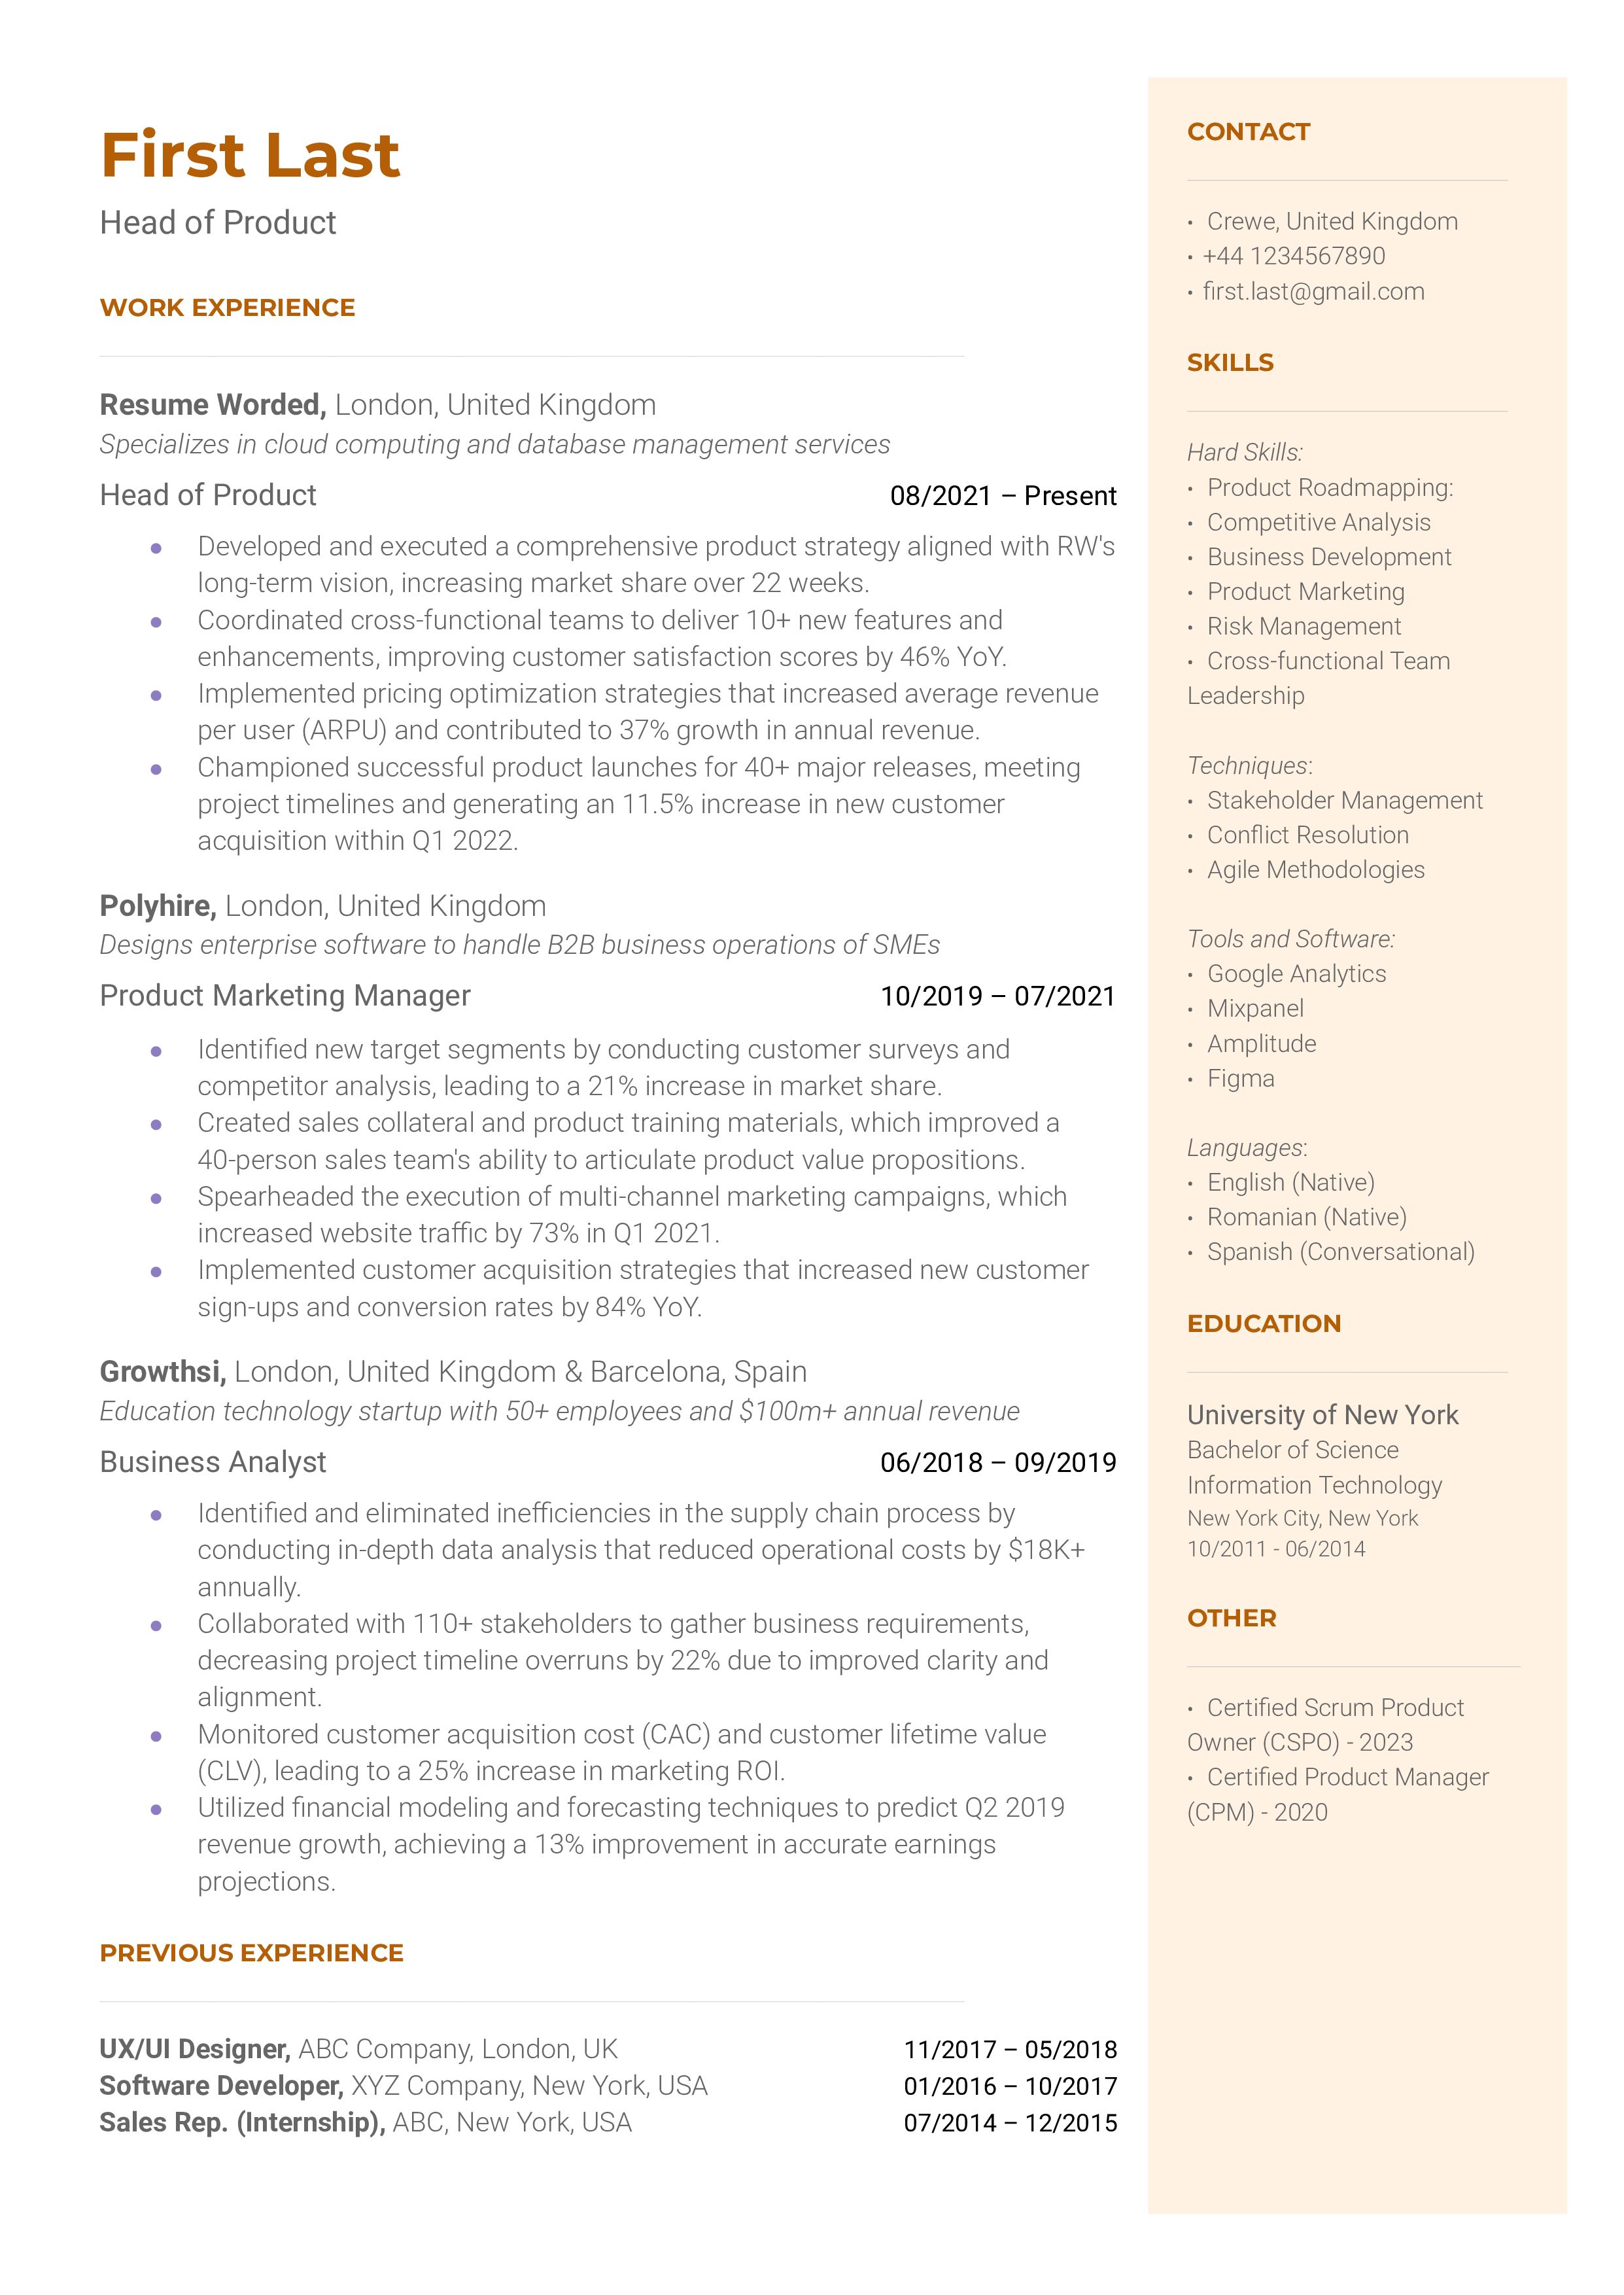 A detailed CV showcasing the candidate's achievements as a Head of Product.